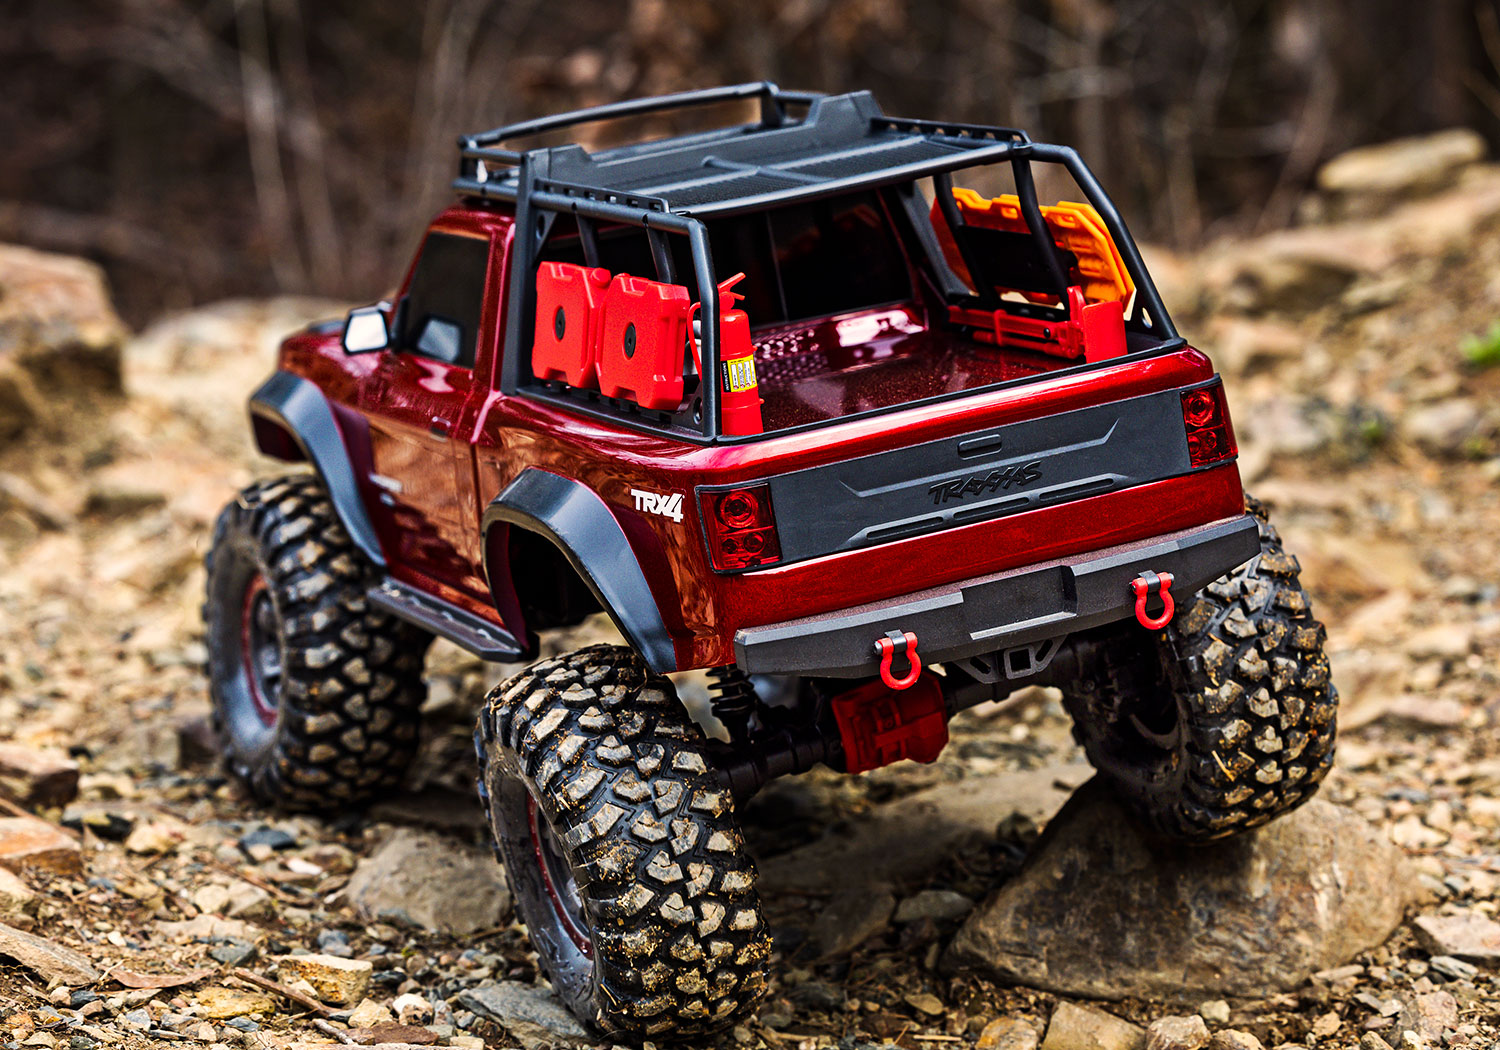 PACK ECO 100% RTR TRX-4 SPORT HIGH TRAIL ROUGE LIPO 3S 5000 MAH CHARGEUR TRAXXAS SAC OFFERT